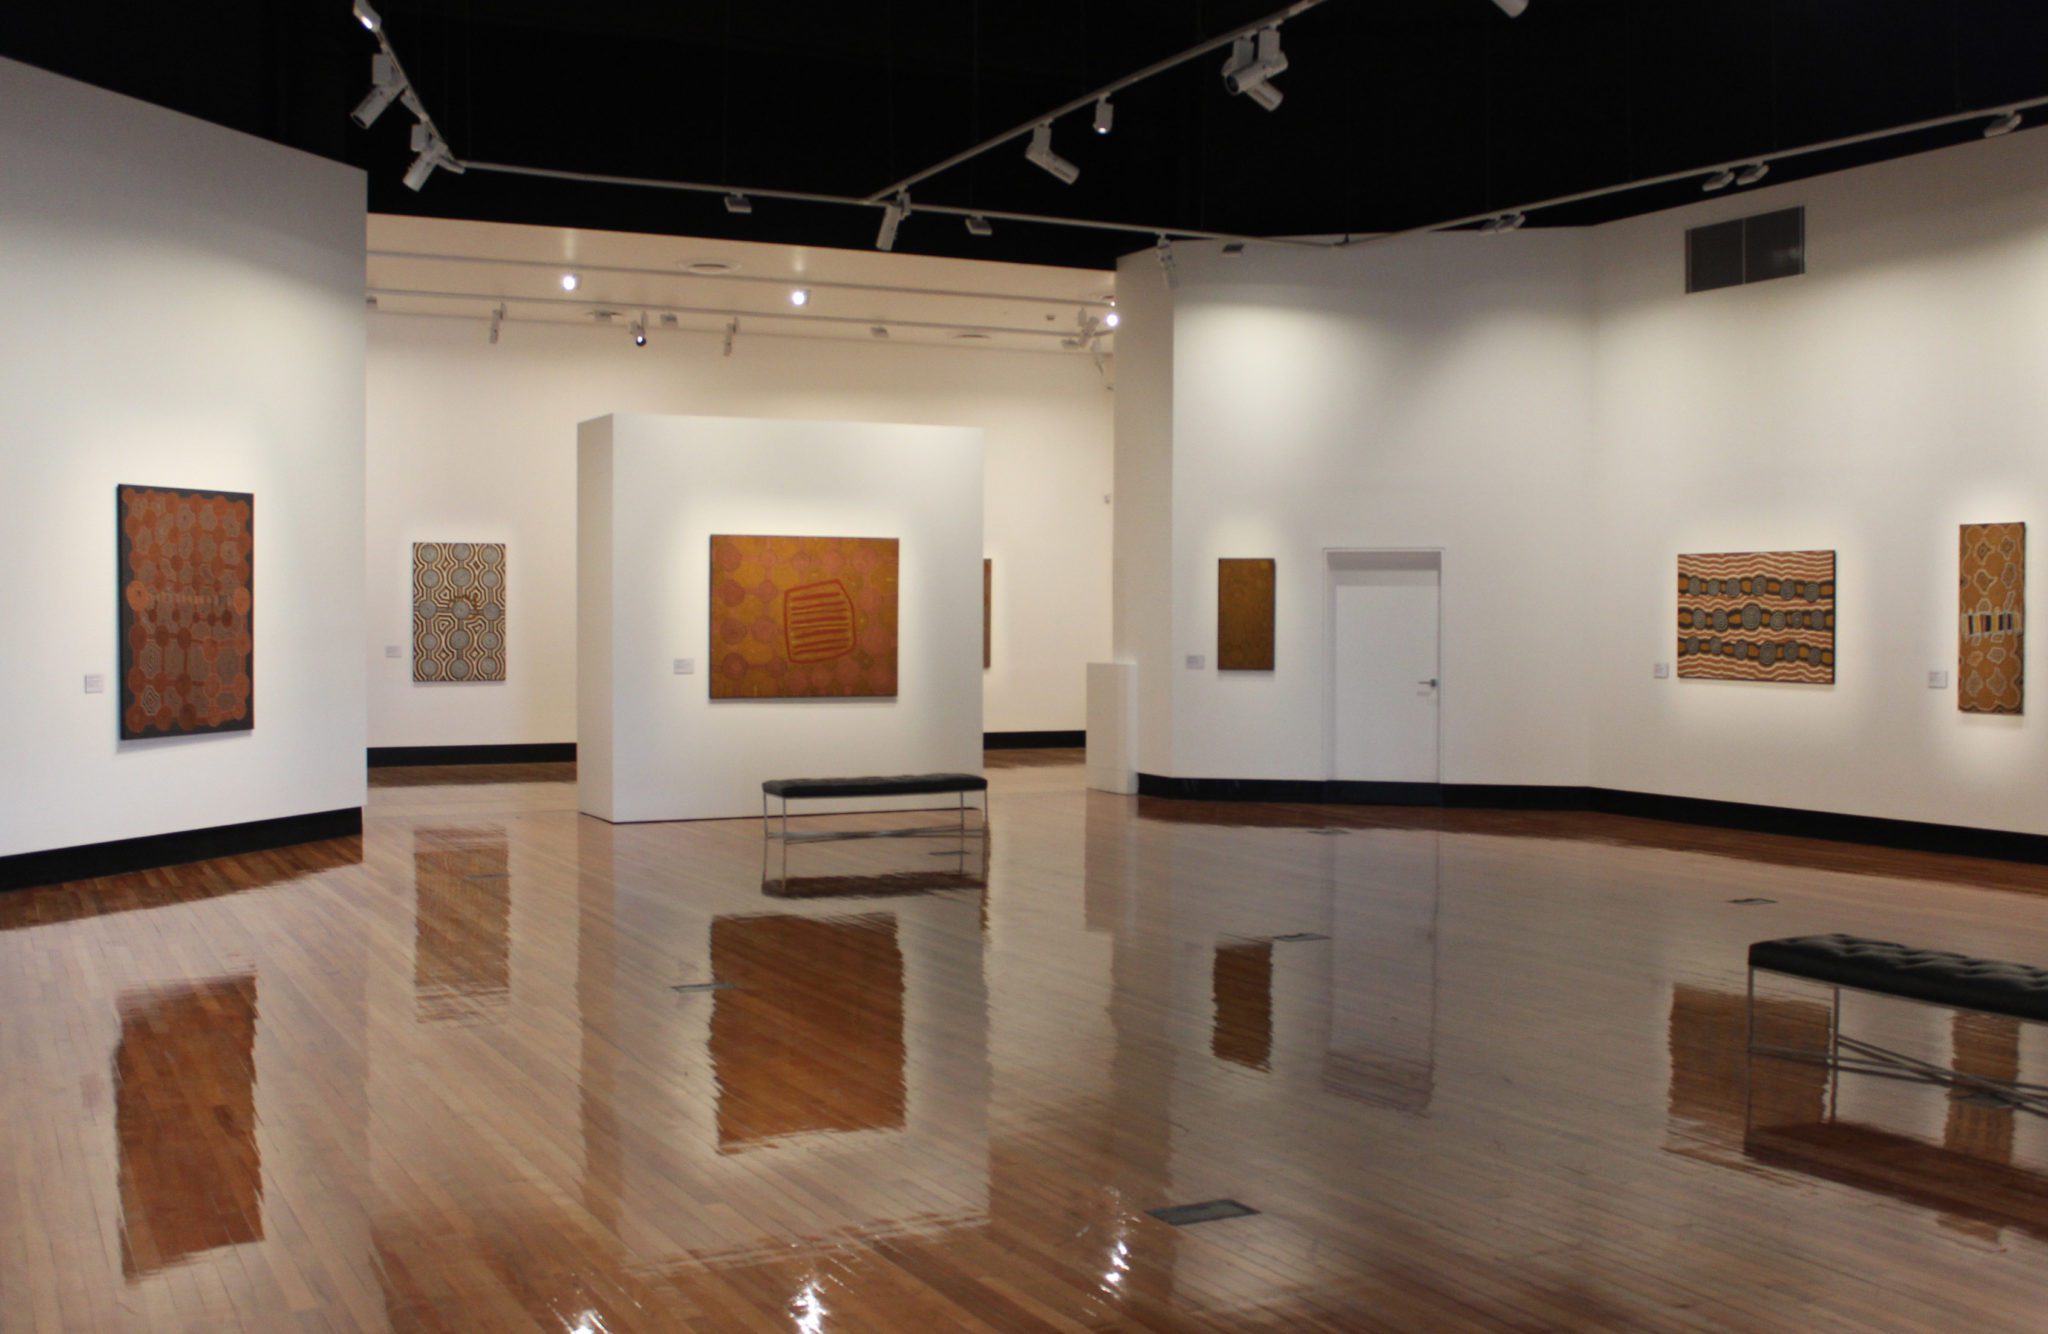 Exhibition documentation of Friendly Country, Friendly People: Art from Papunya Tula, works from the CBUS Collection of Australian Art. Shown in Gallery 1 & 2, Latrobe Regional Gallery, 2020.